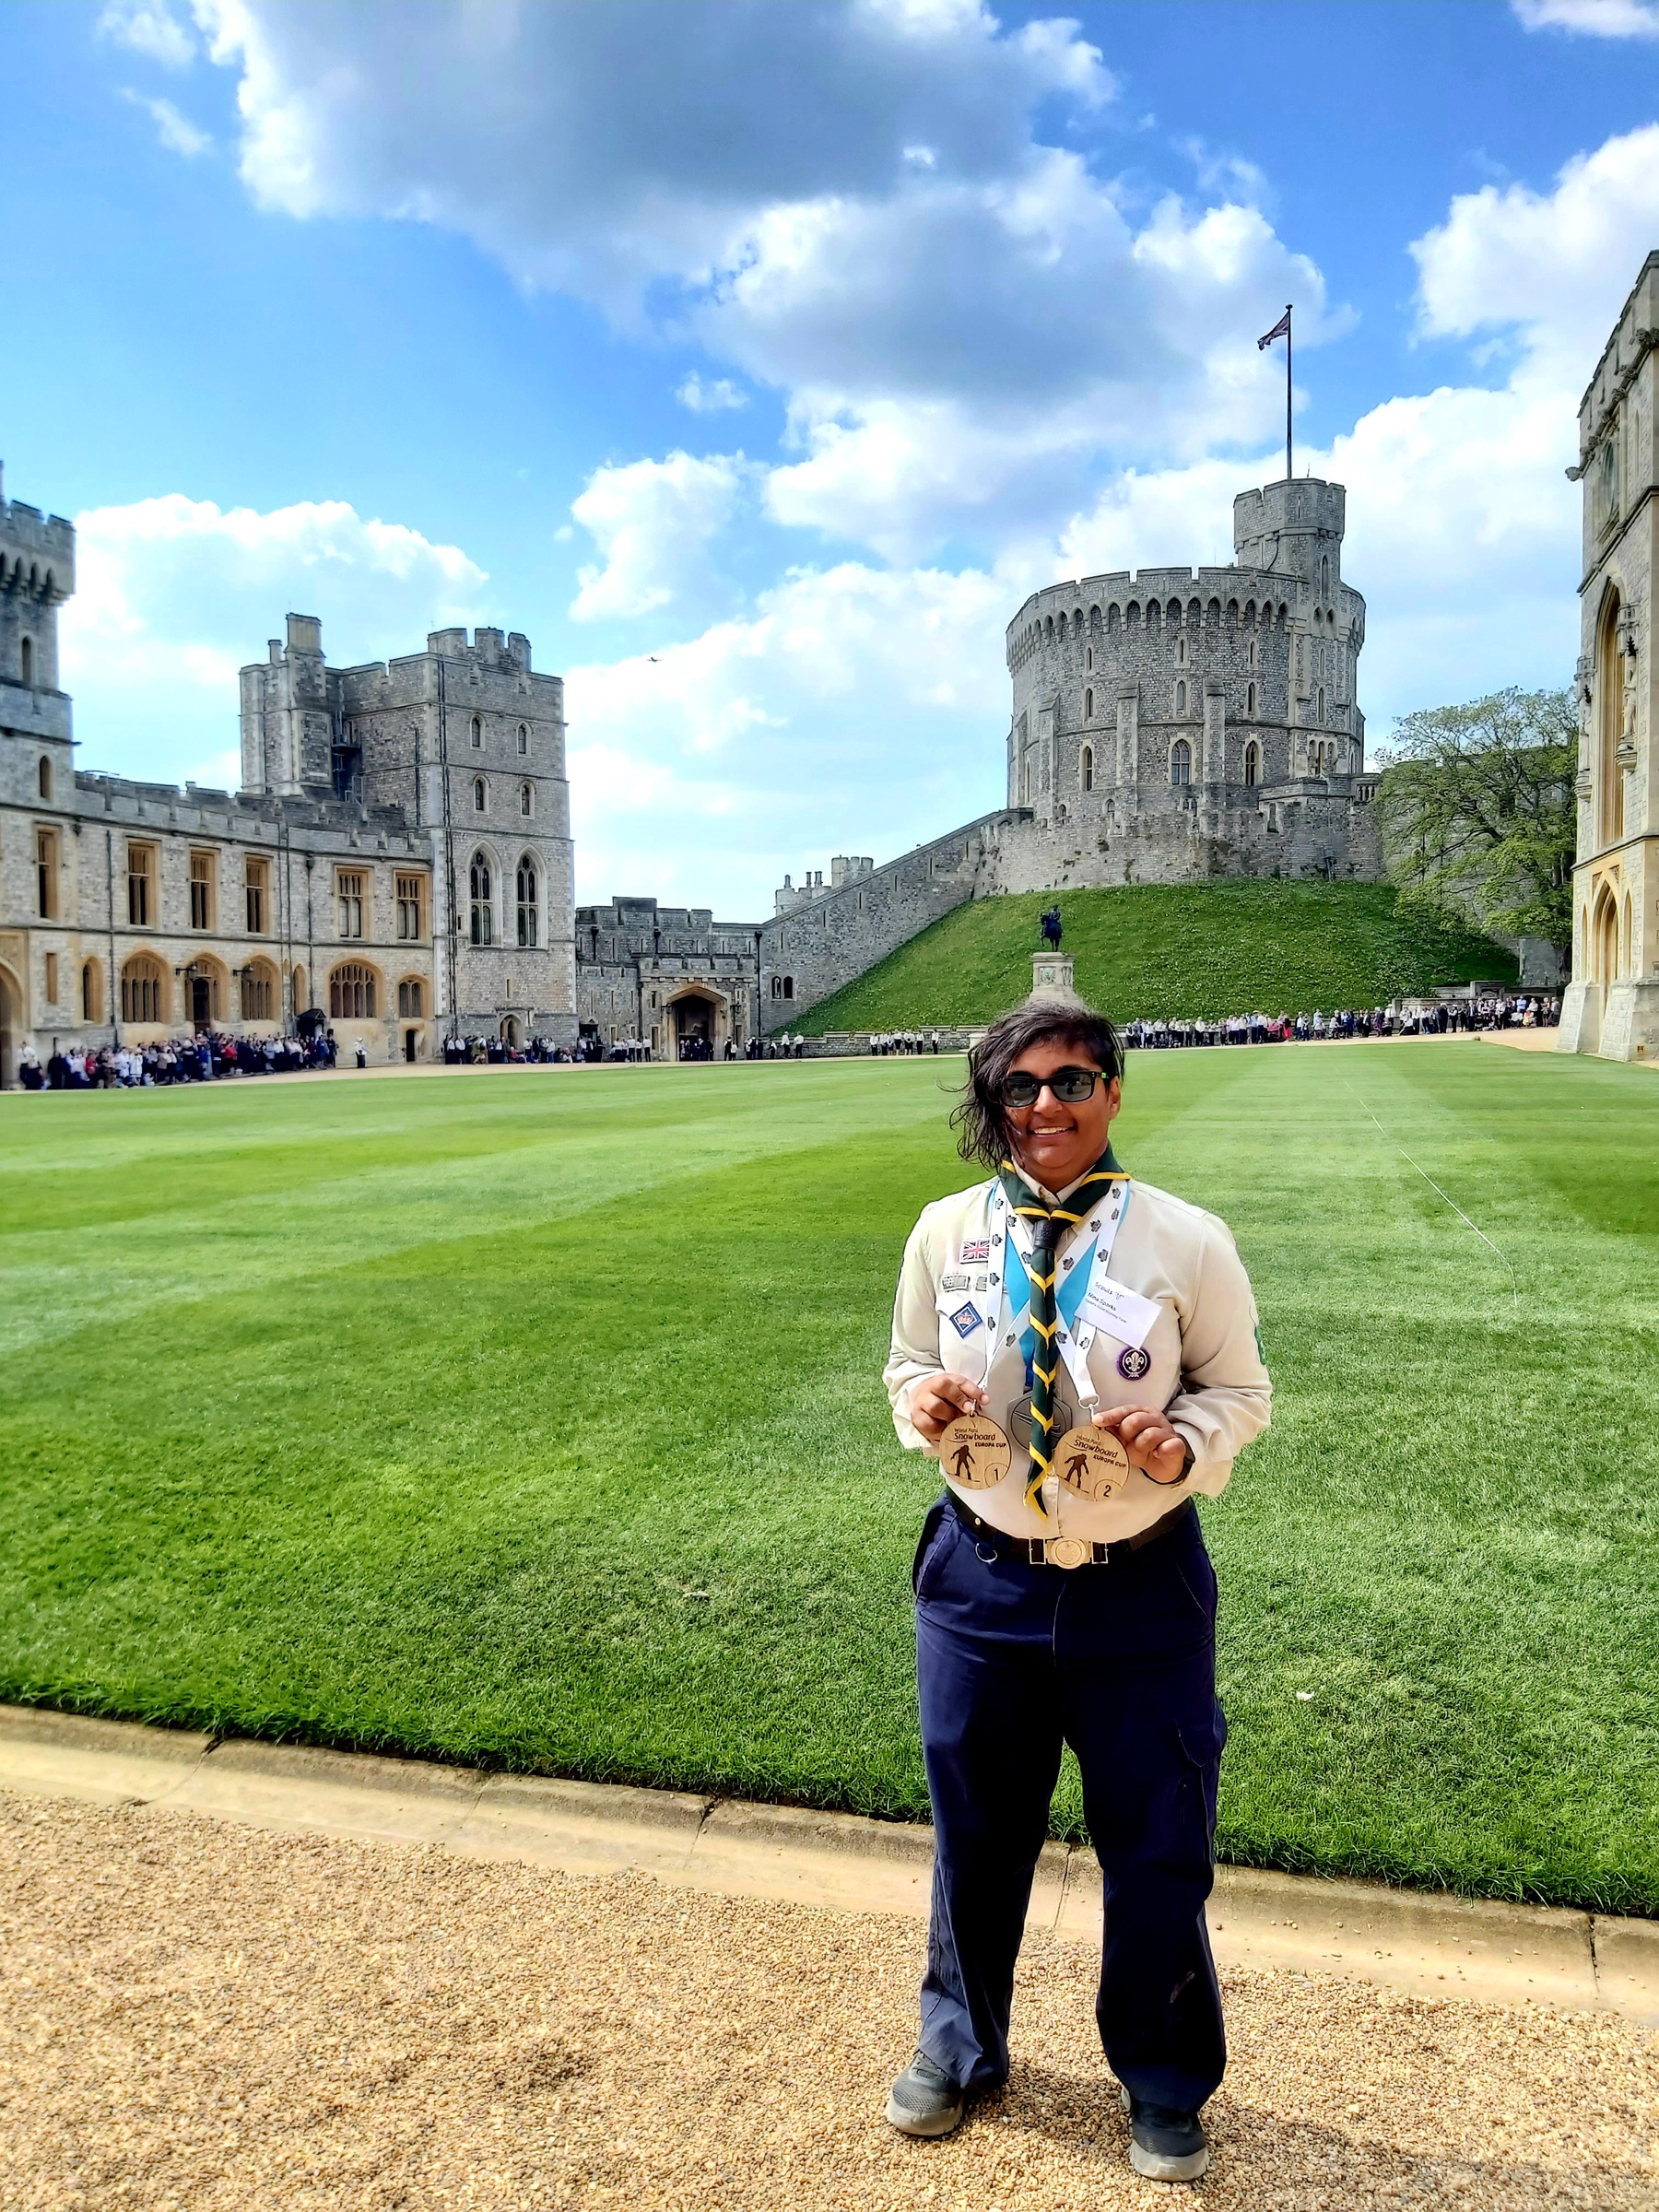 Nina is wearing her Scouts uniform and a necker, holding badges and standing on the gravel in front of Windsor Castle